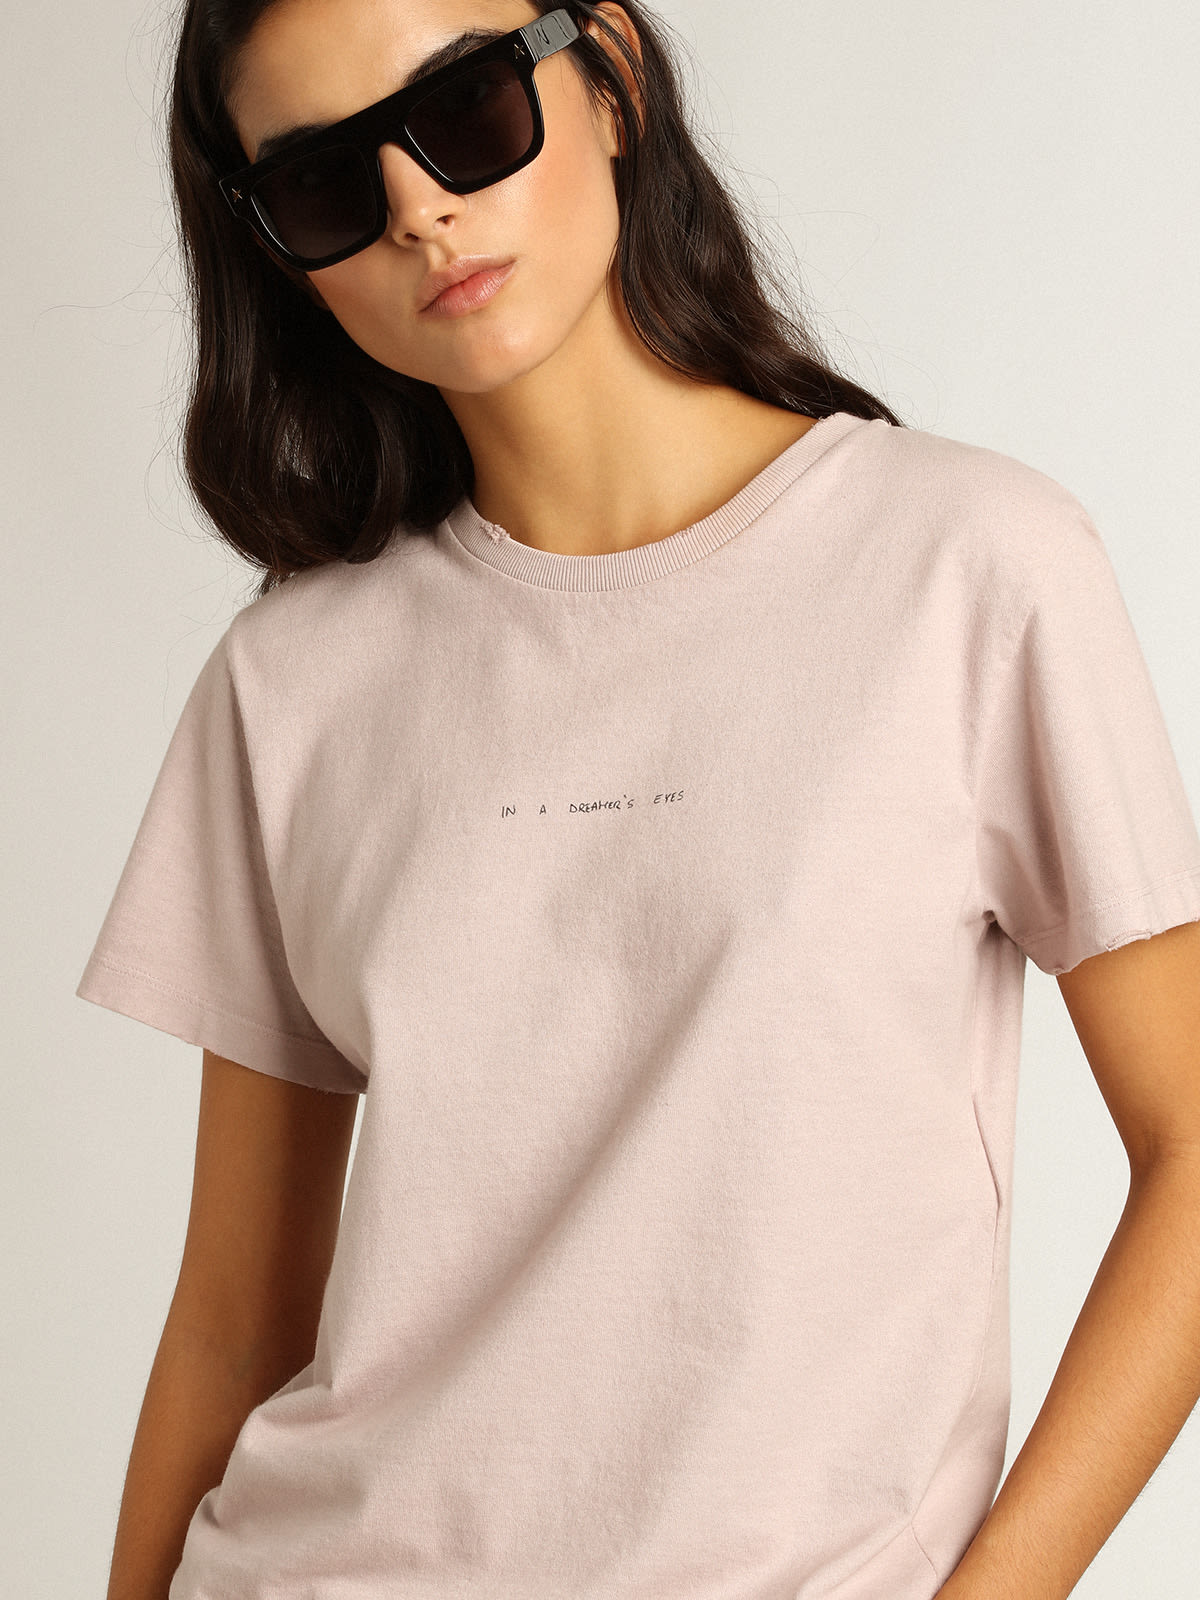 Golden Goose - Pale pink T-shirt with lettering on the front in 